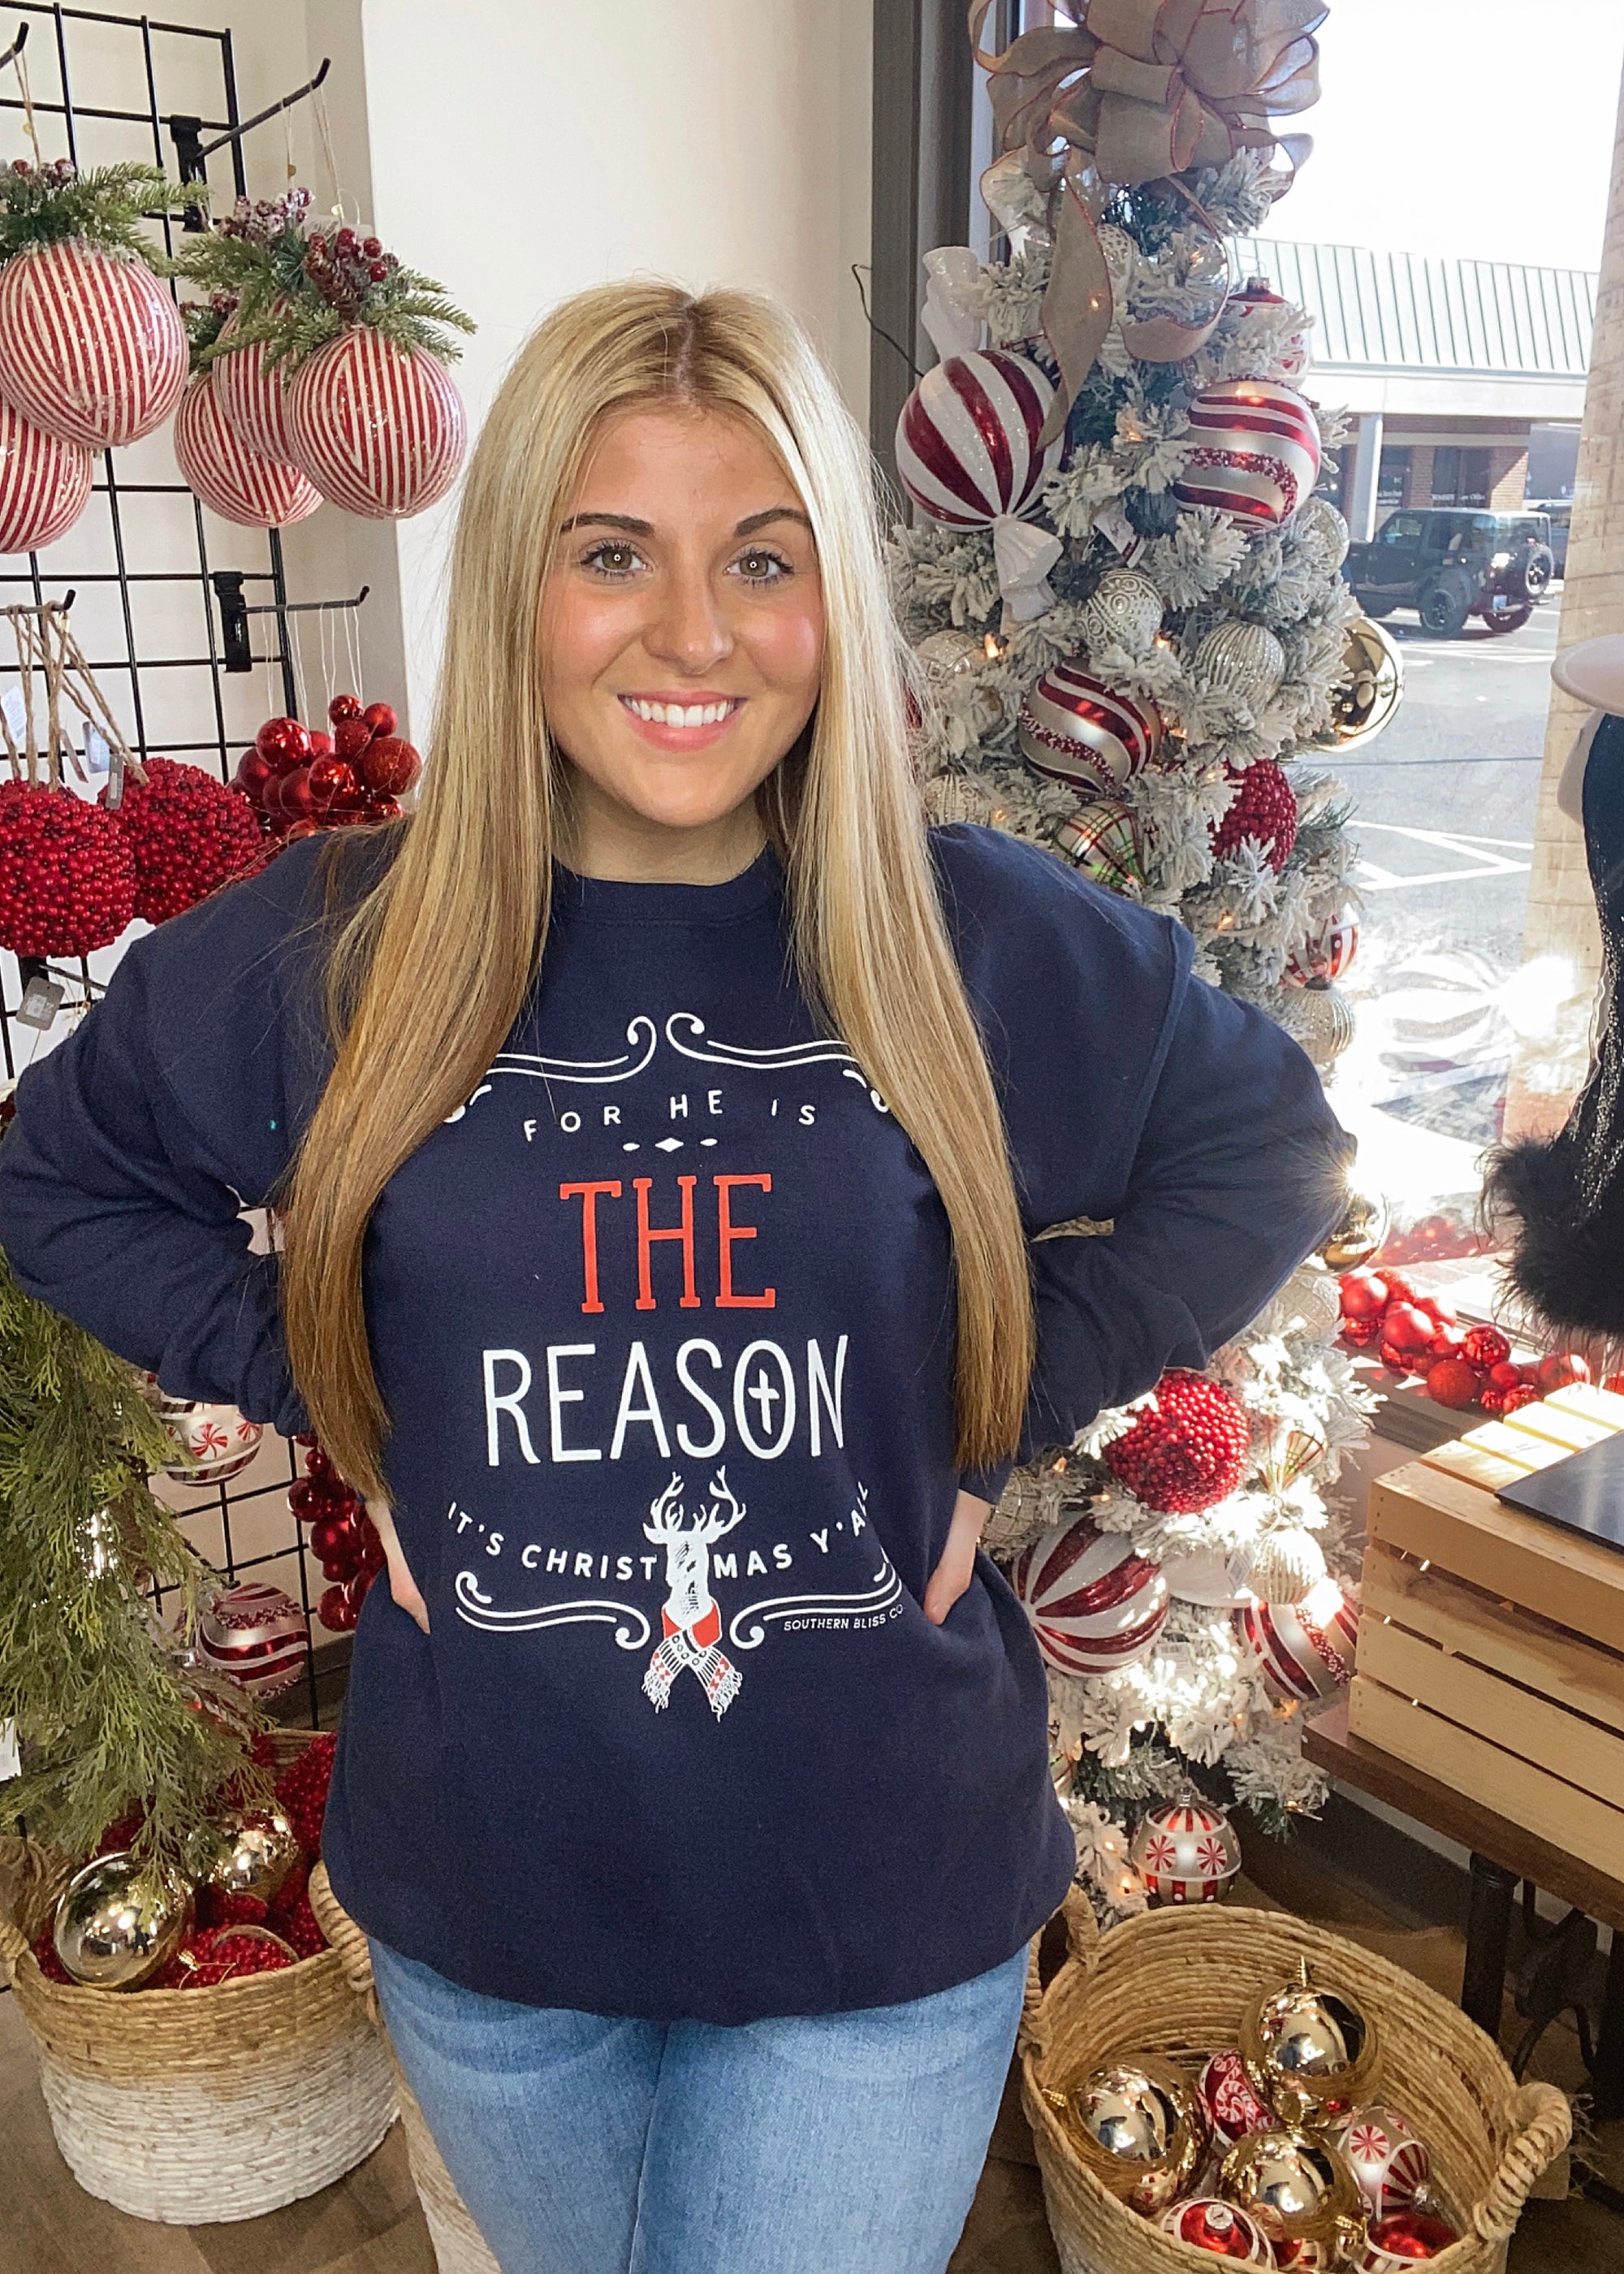 For HE Is The Reason - B3 Boutique, LLC